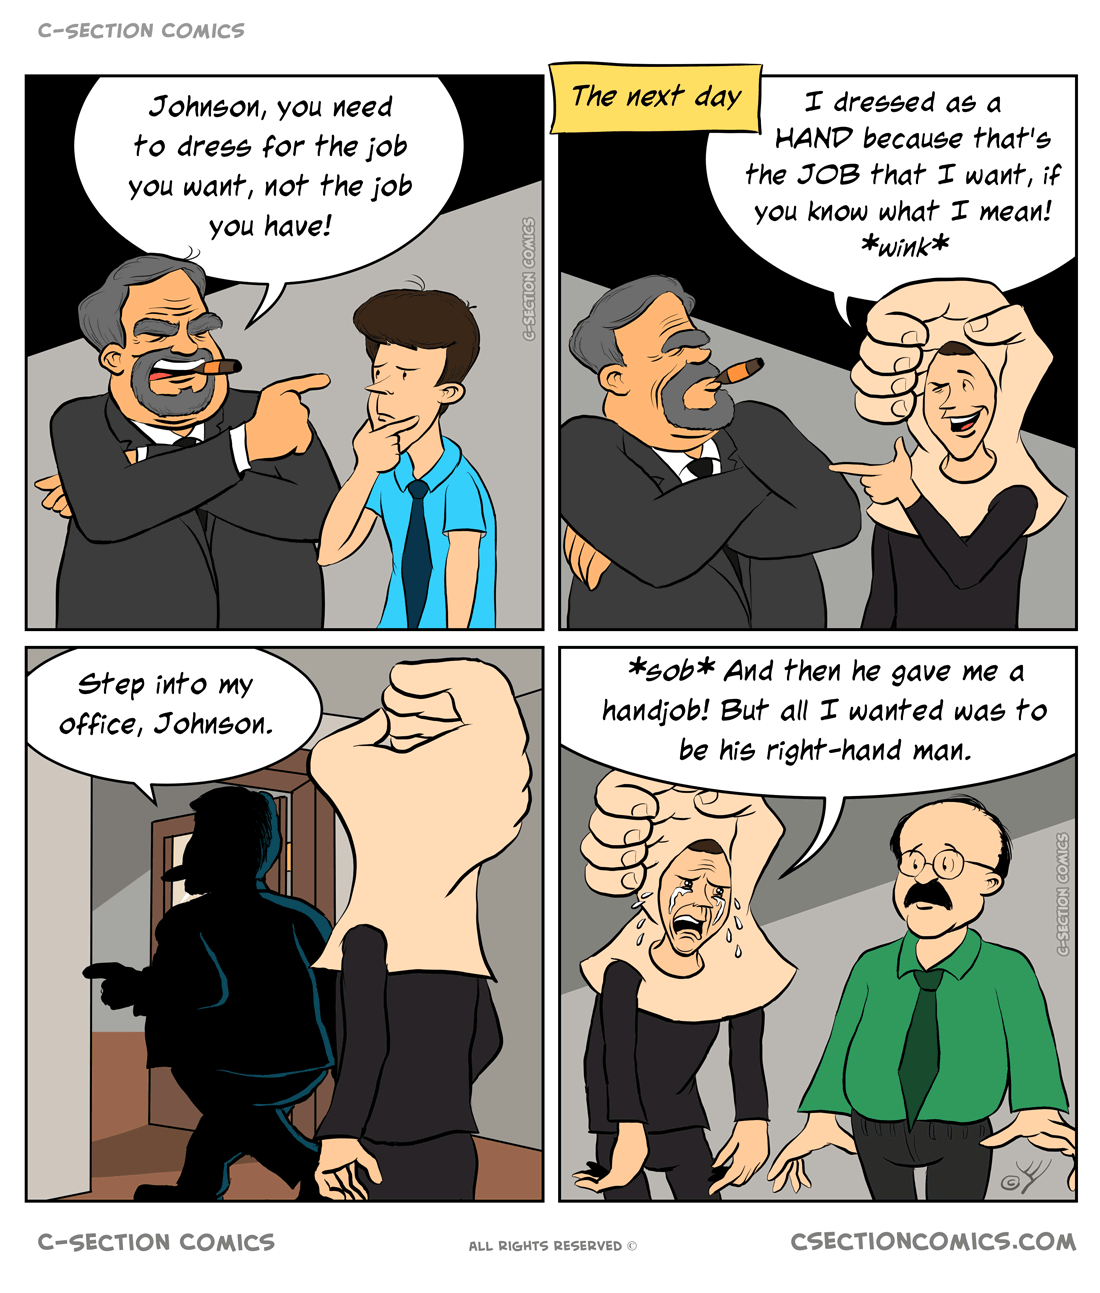 Dress for the job you want - by C-Section Comics